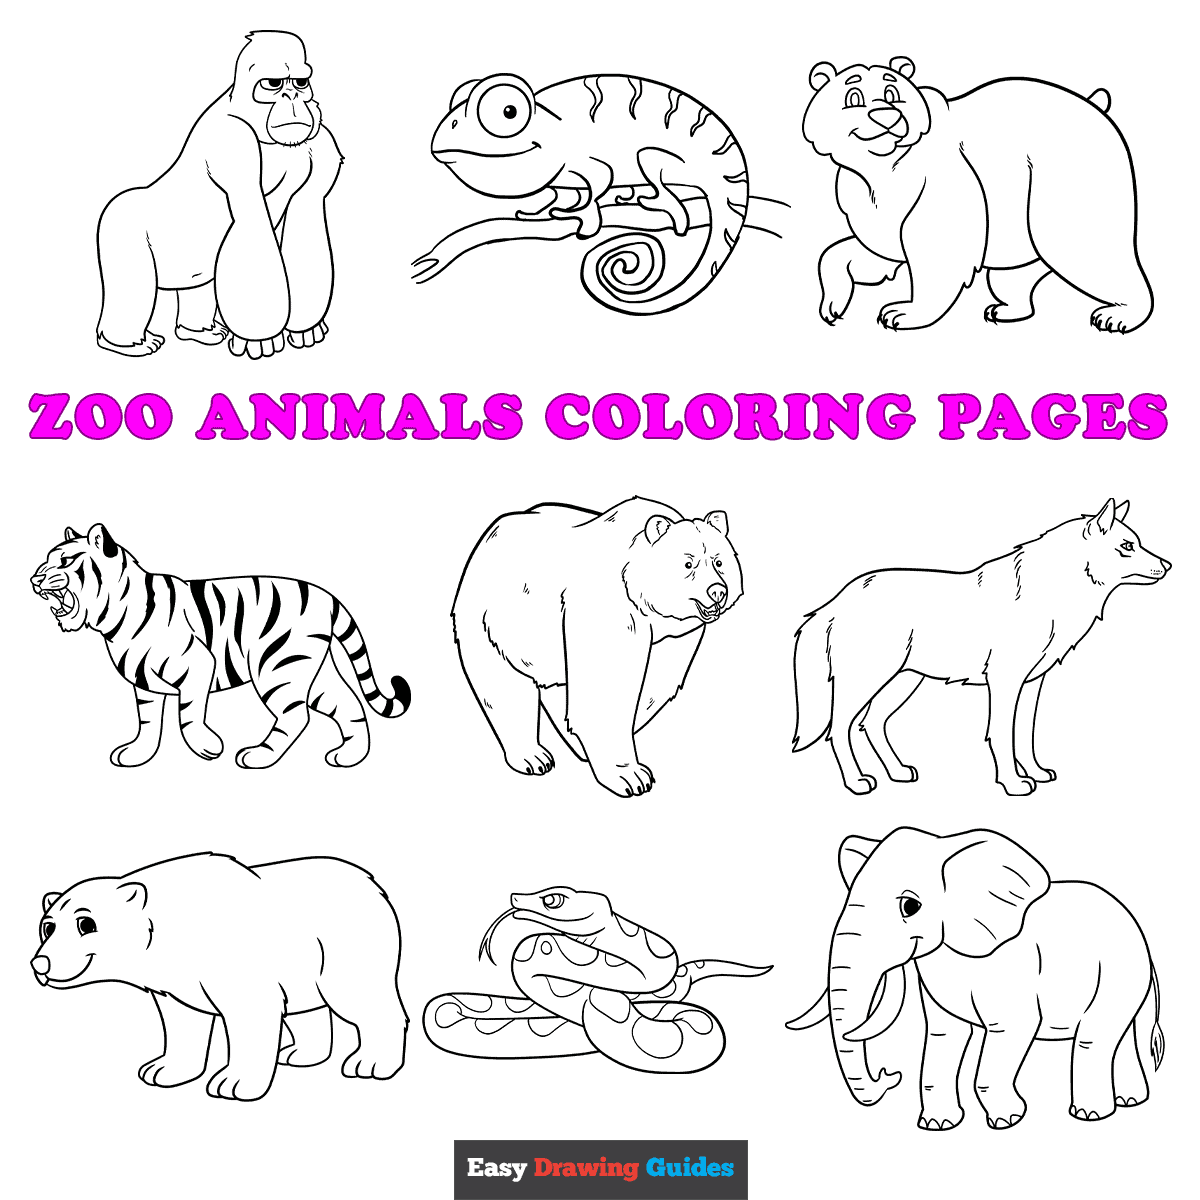 Free Printable Zoo Animals Coloring Pages For Kids - Free Printable Animal Coloring Pages